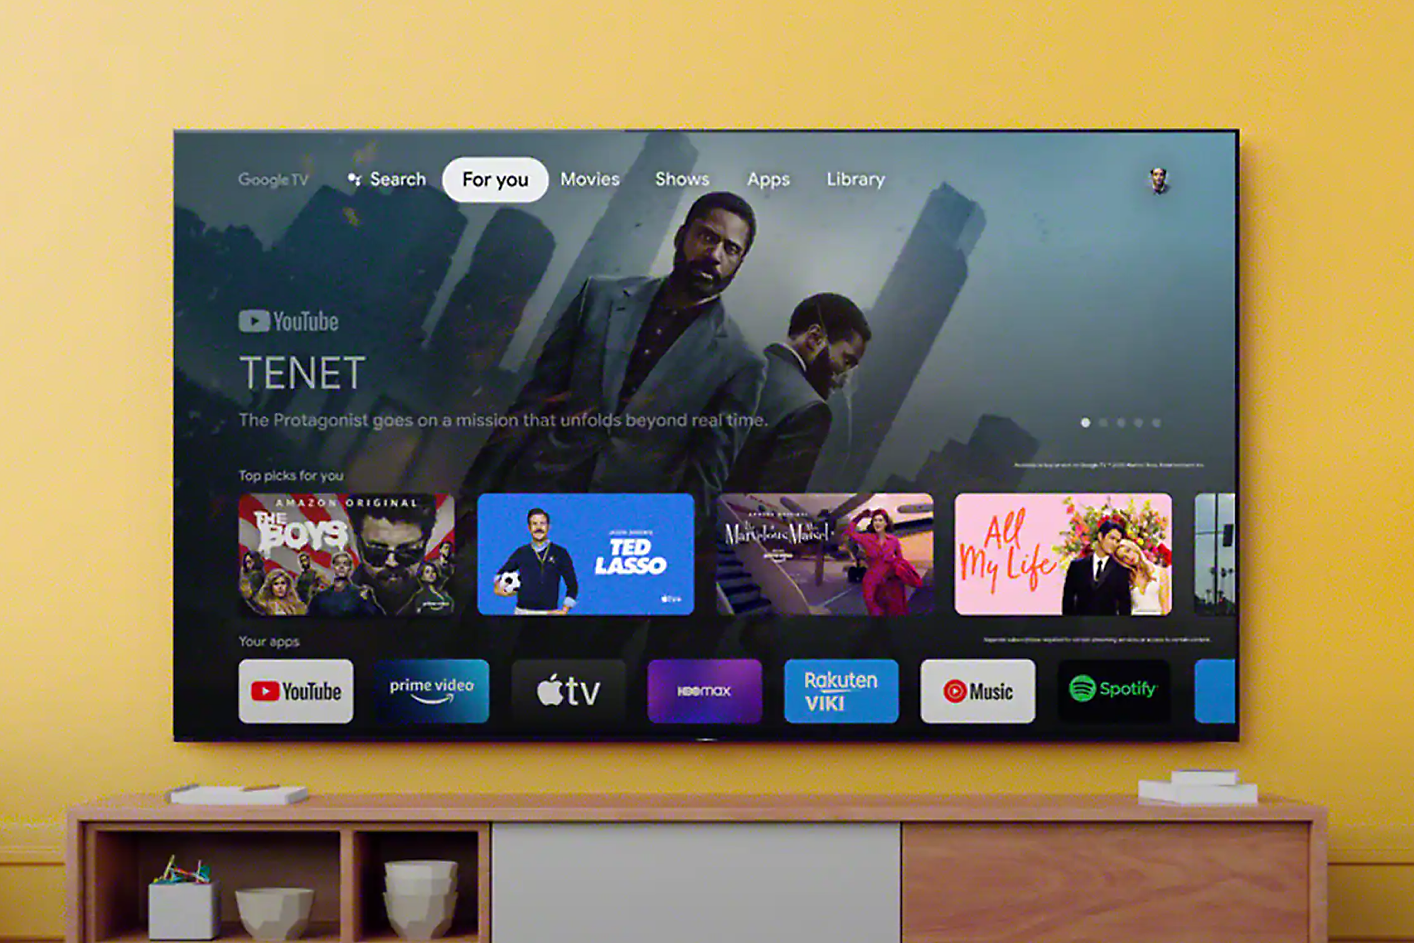 A TV screen shows an interface with search navigation and an app selection, with a scene from "Tenet" on screen in the background.